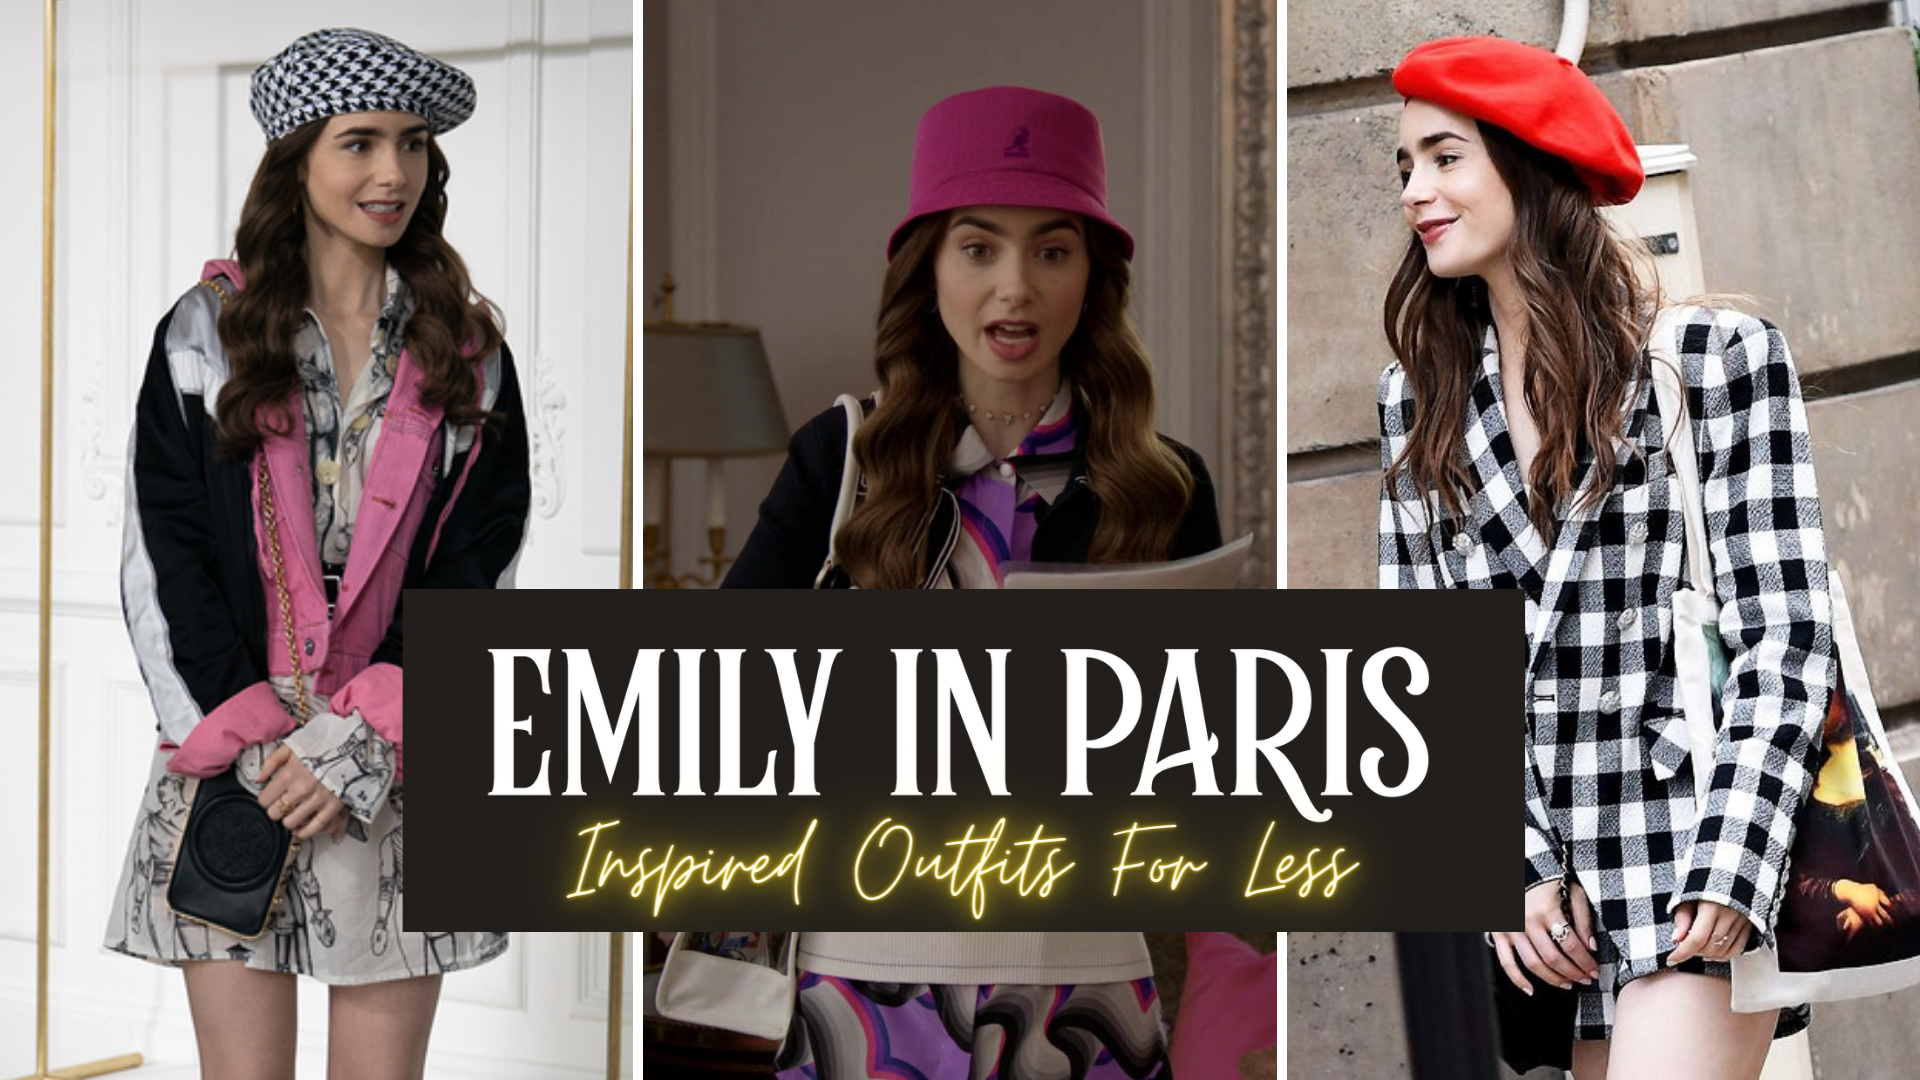 I Have A Thing For Emily In Paris Fashion Trends With Berets And Bucket  Hats – Here's How I Scored The Looks For Less 